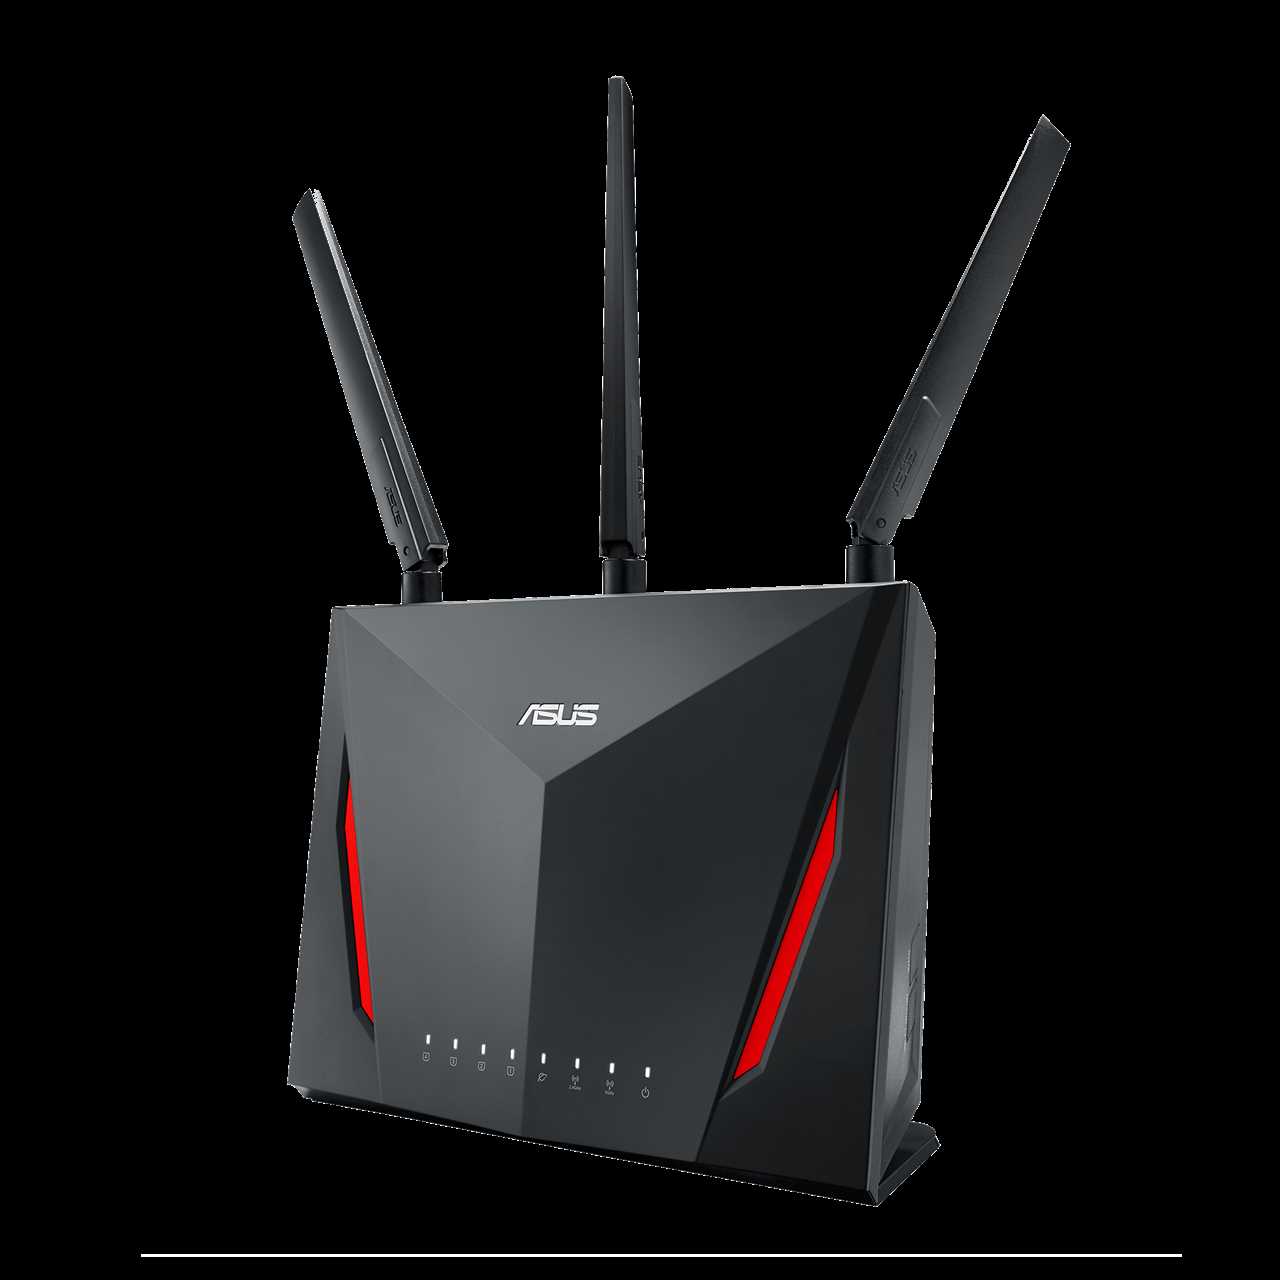 Popular models of Asus routers